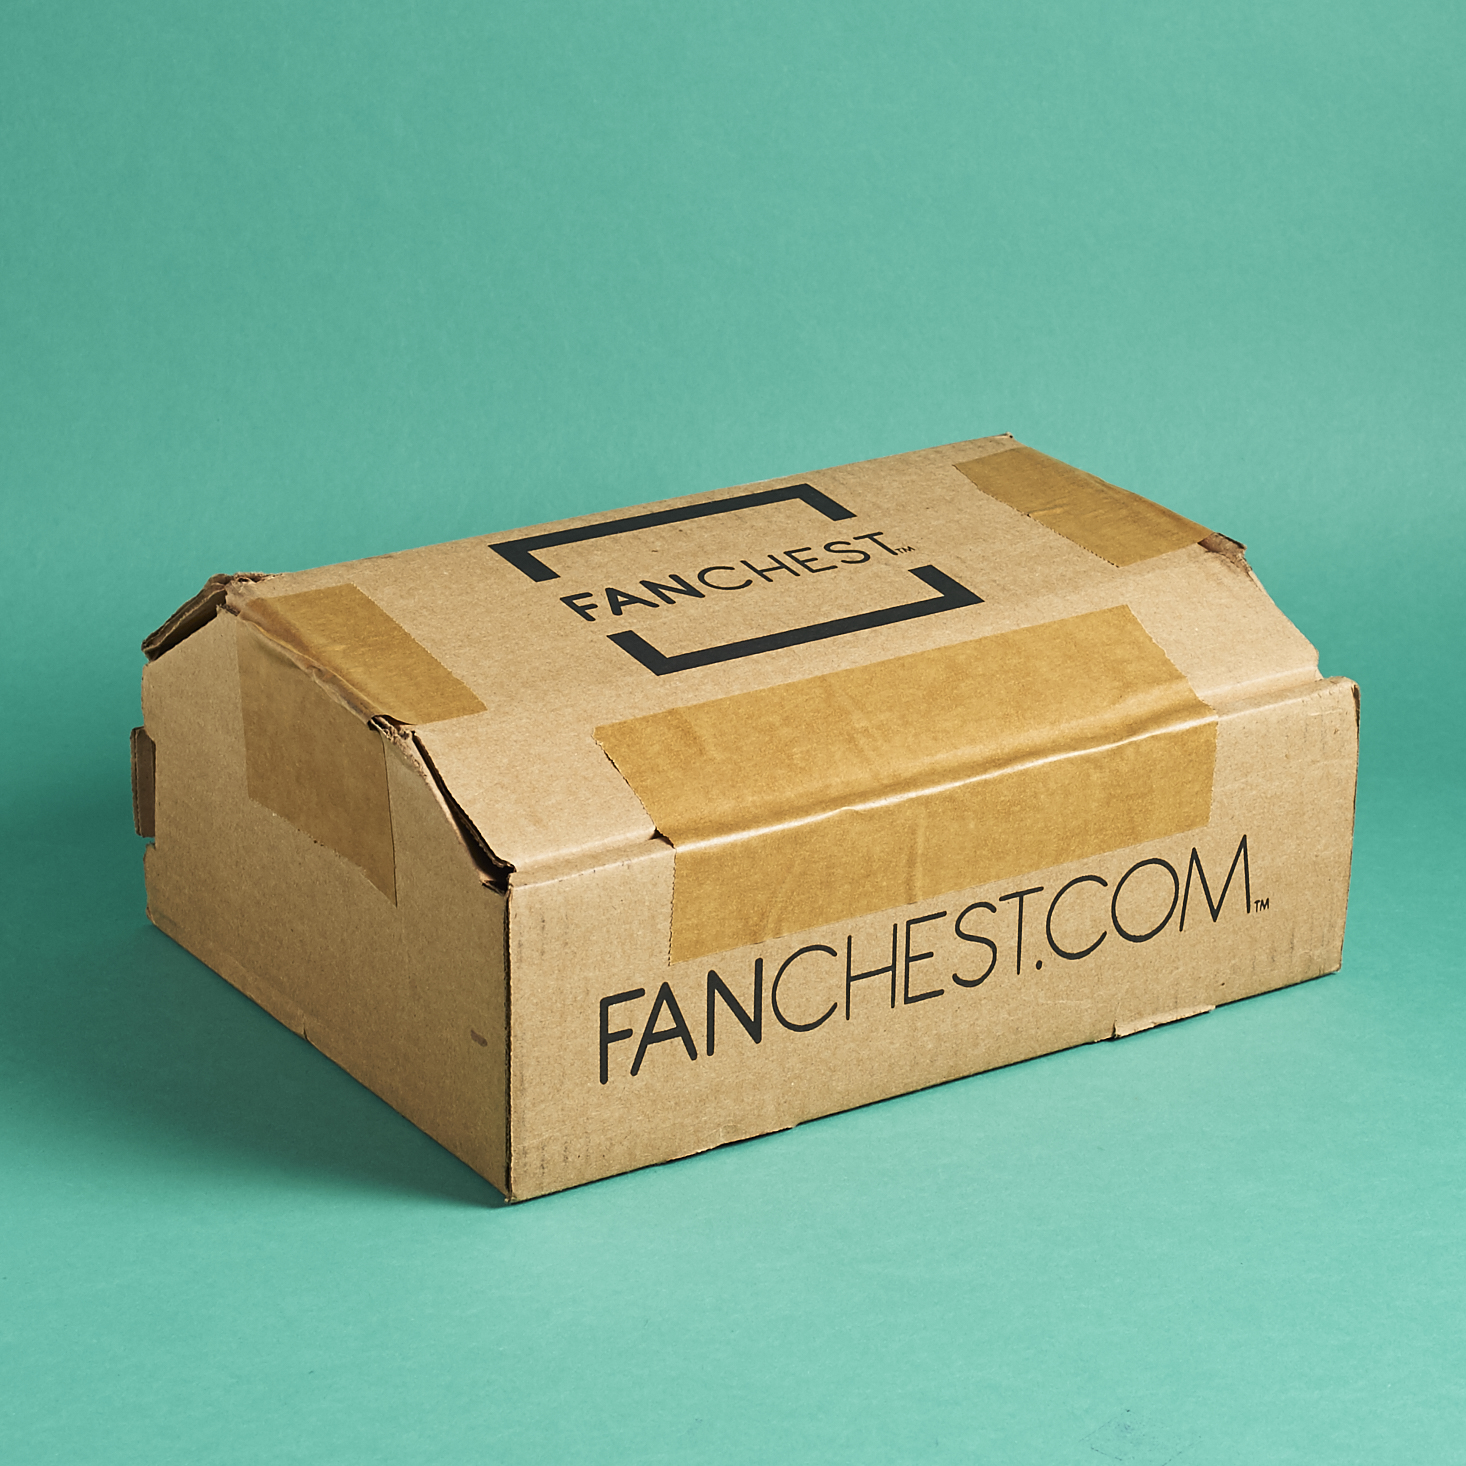 Pittsburgh Penguins Fanchest Box Review – December 2016